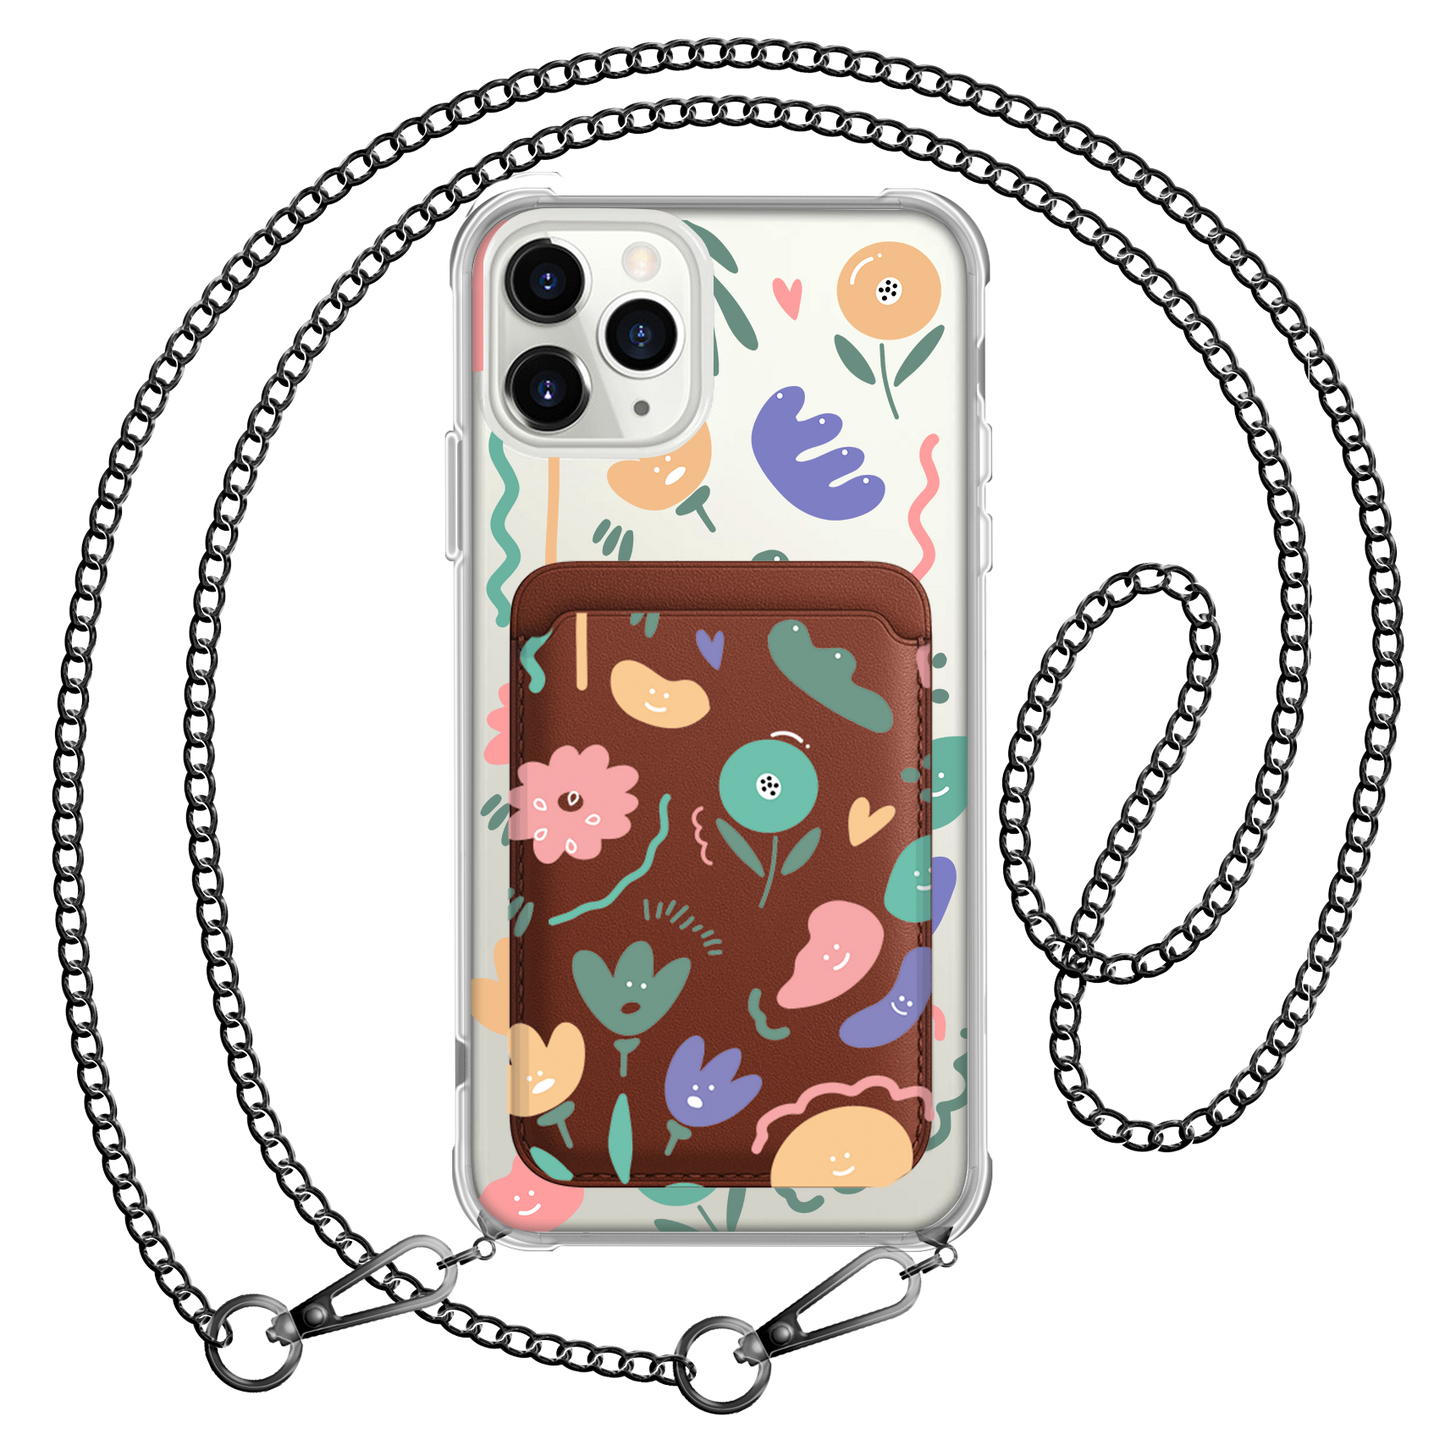 iPhone Magnetic Wallet Case - Celestial 1.0